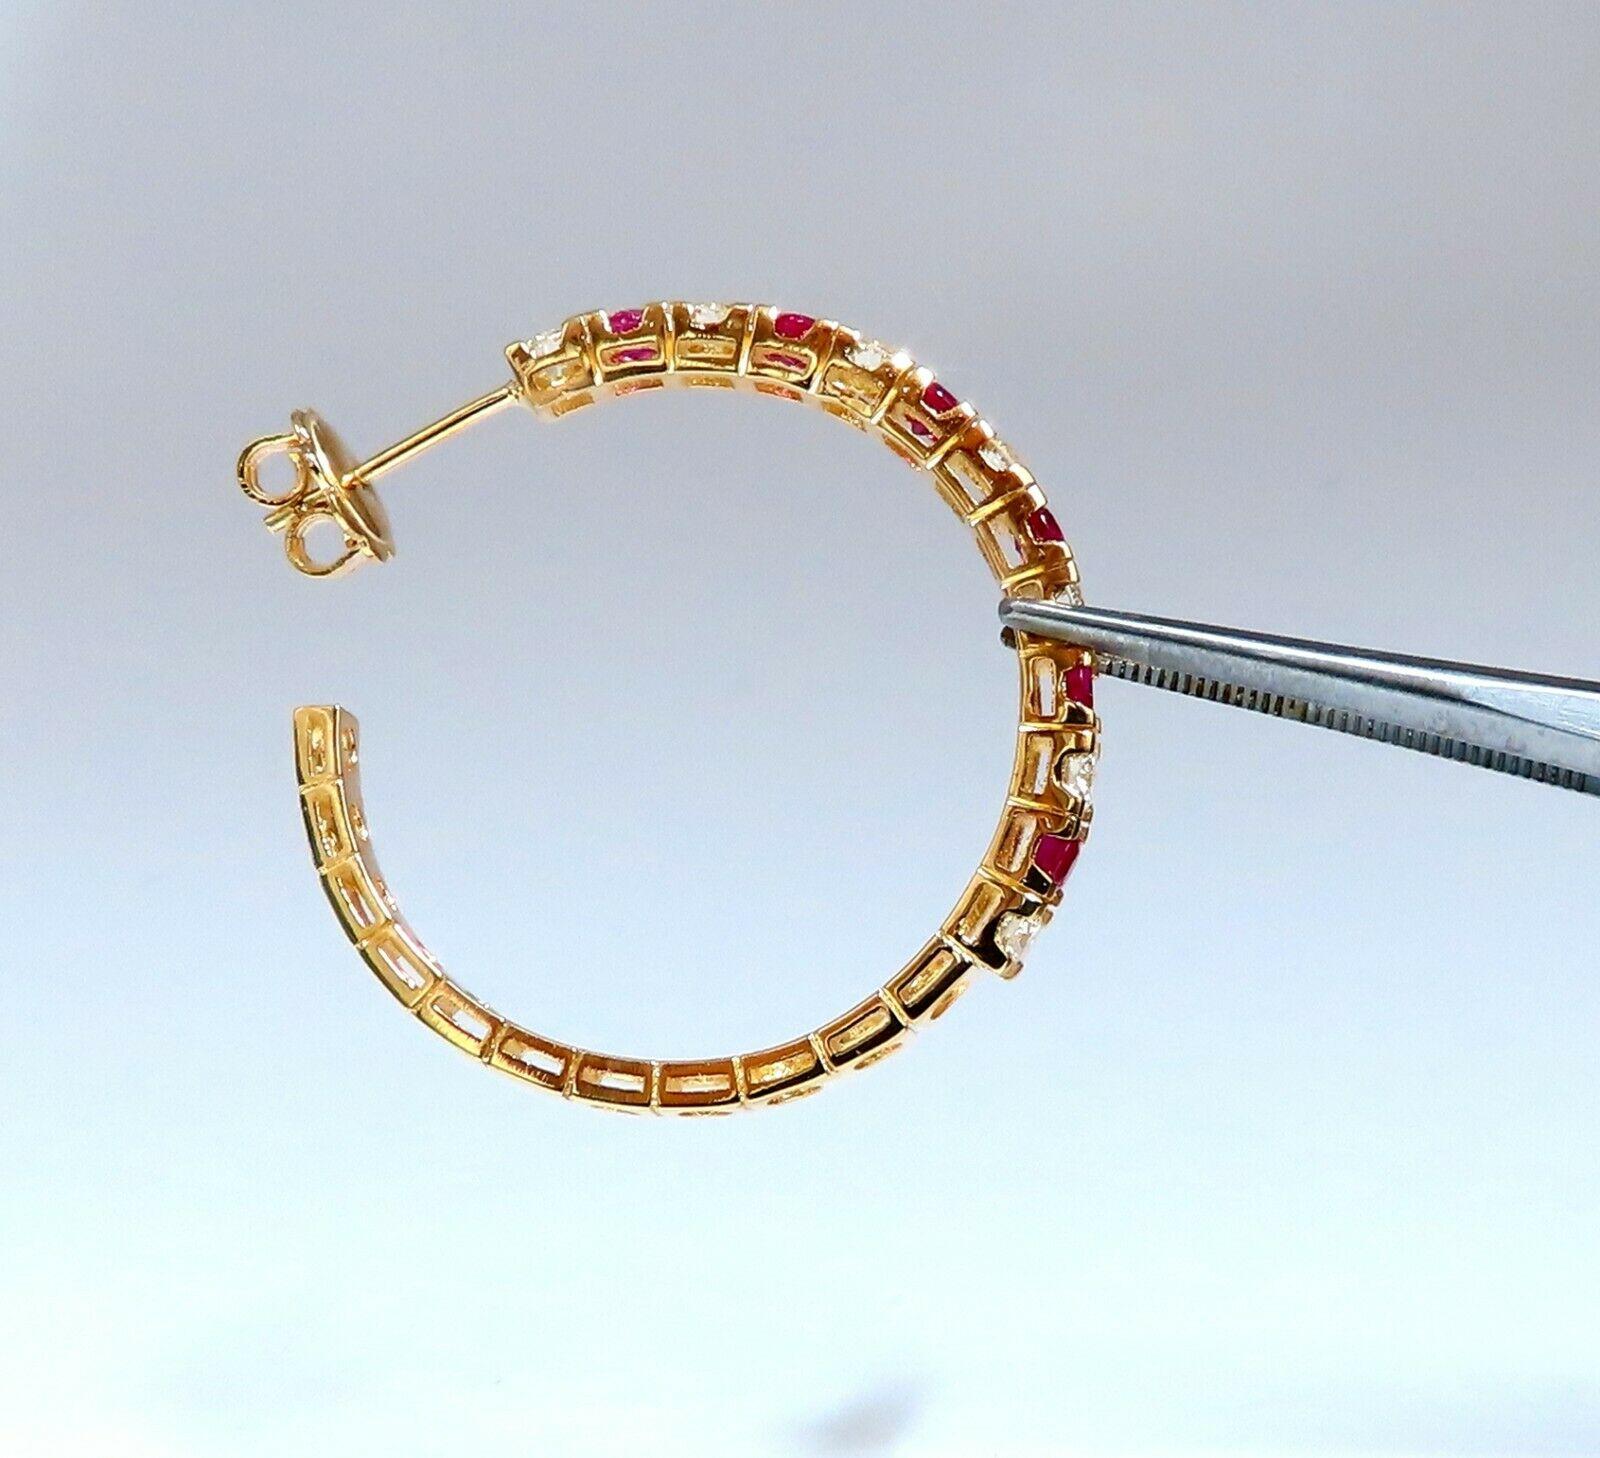 Rubies, Diamonds Alternated 

Inside Out 

.1.00ct. Natural Ruby Hoop Earrings.

Rubies: Rounds, Full Cut.

Transparent & Even Red tone.

Vivid red colors

1.10cts of round diamonds: 

G-color, Vs-2 clarity.

14kt. yellow gold

6.8 grams.

Earrings